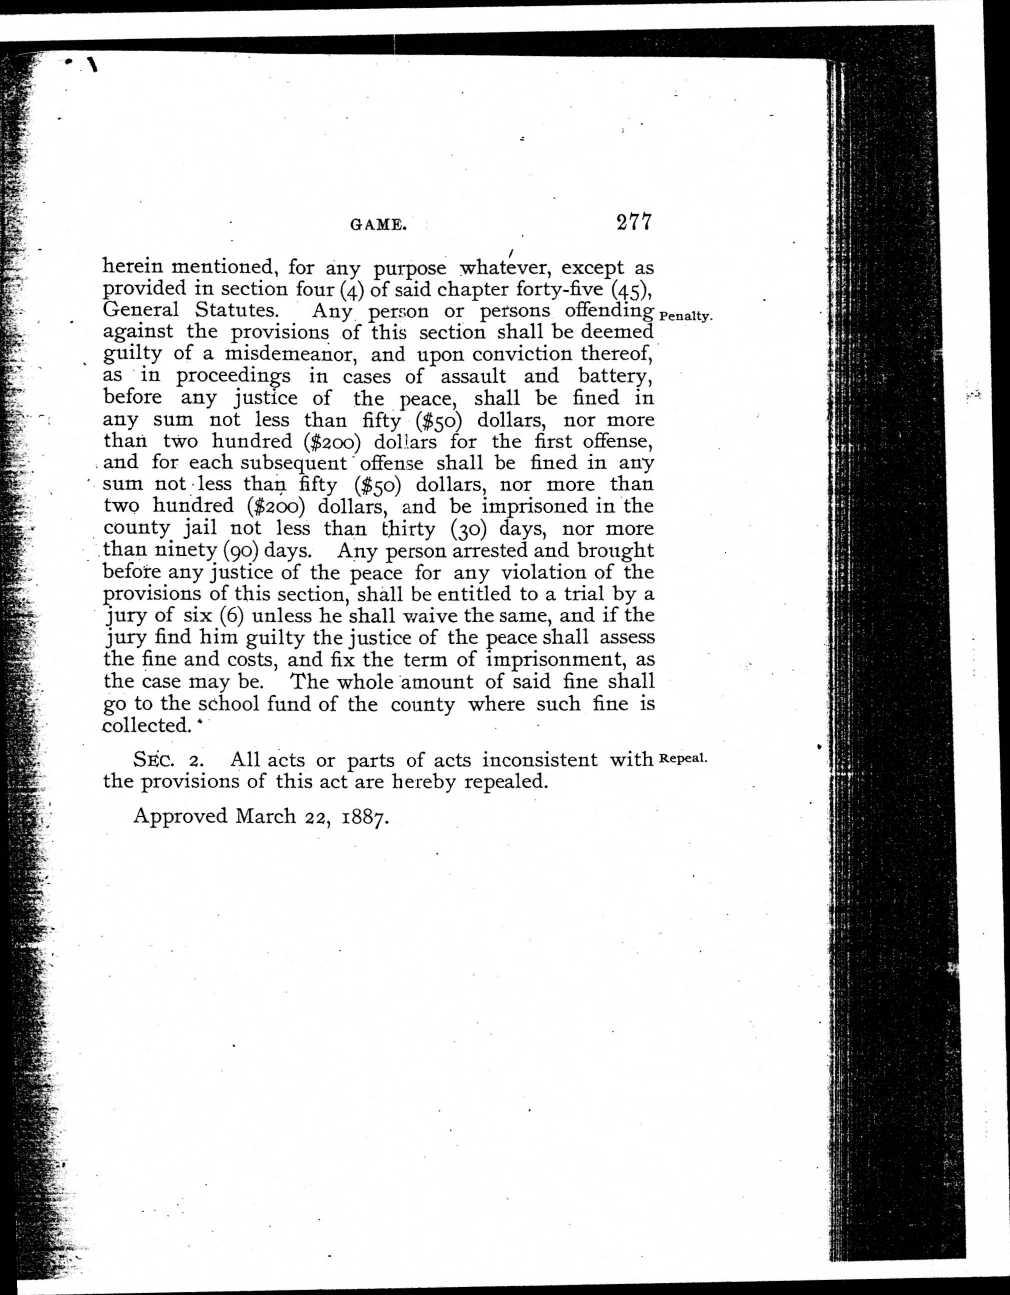 GAME. 277 herein mentioned, for any purpose whatever, except as provided in section four (4) of said chapter forty-five (45), General Statutes. Any, person or persons offending Penalty.